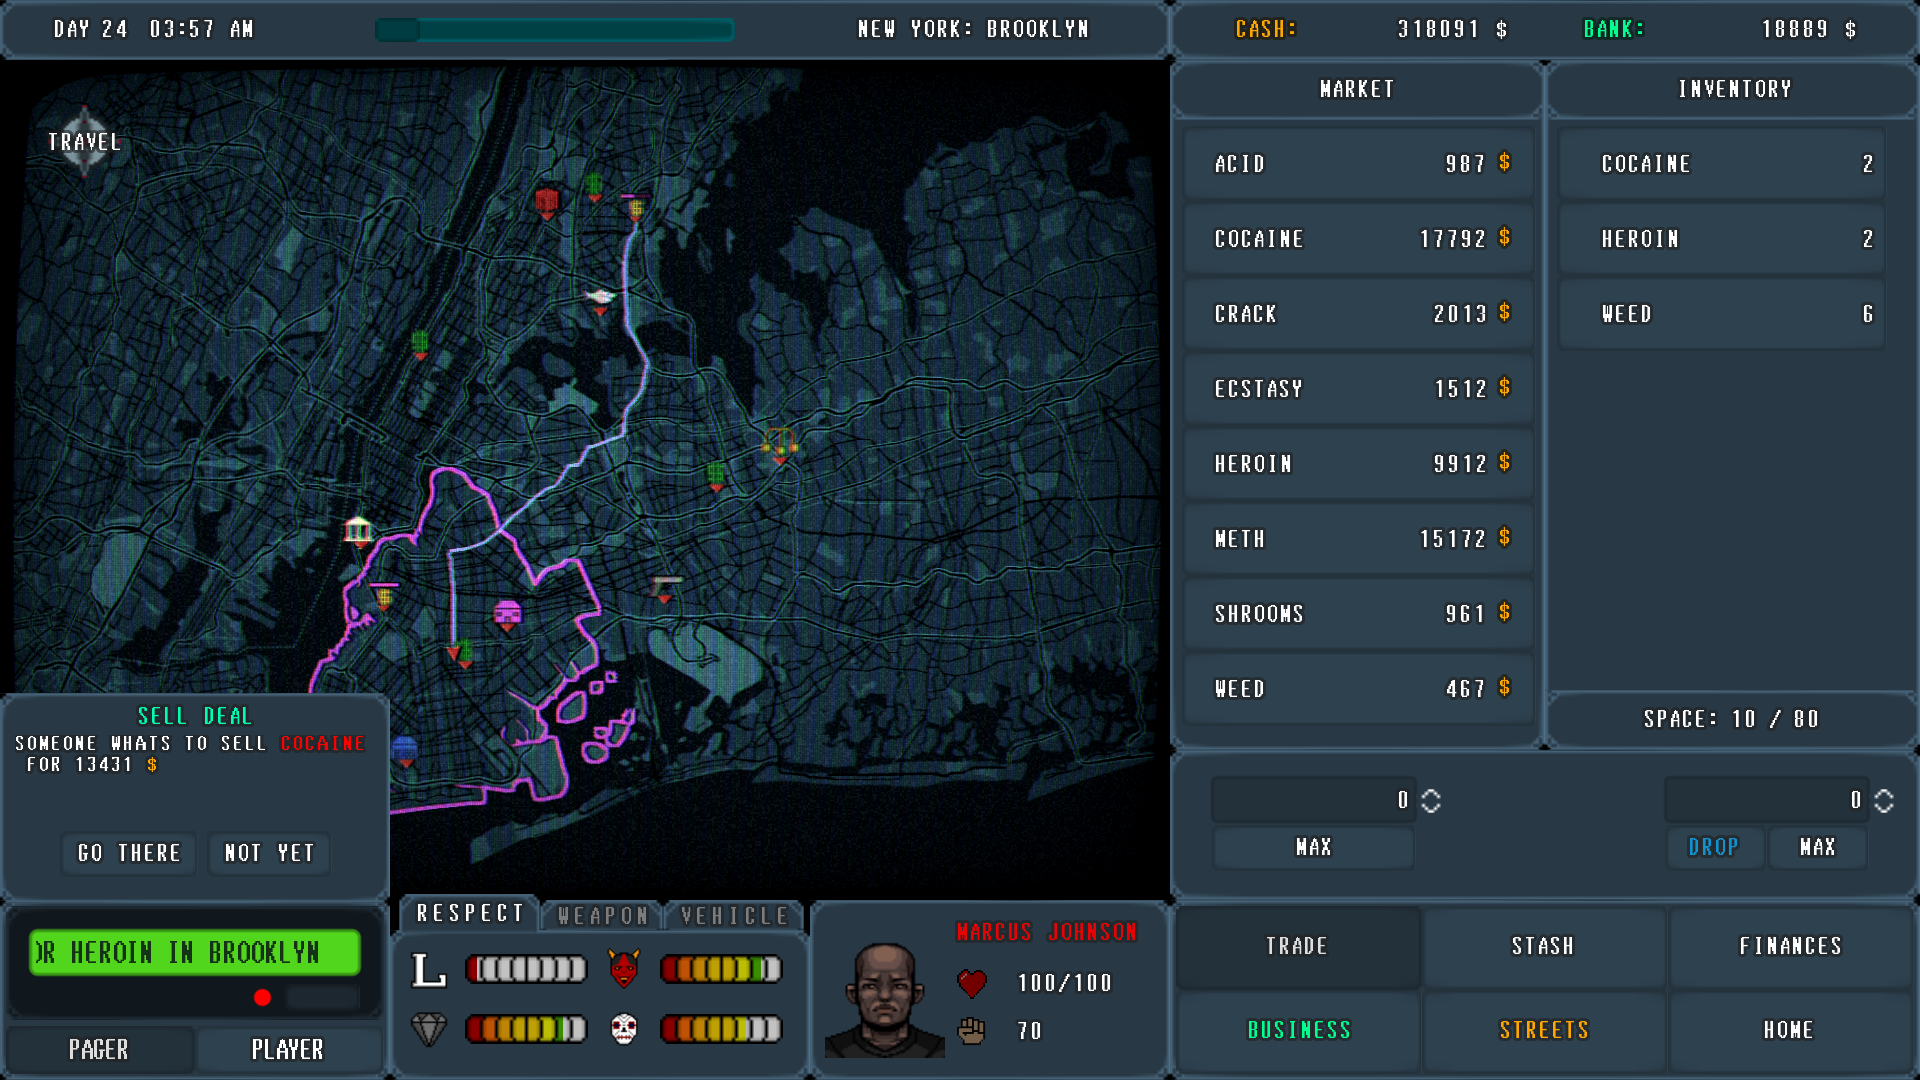 Screenshoot of game PUSHER - DRUG TYCOON showing great deal on pager